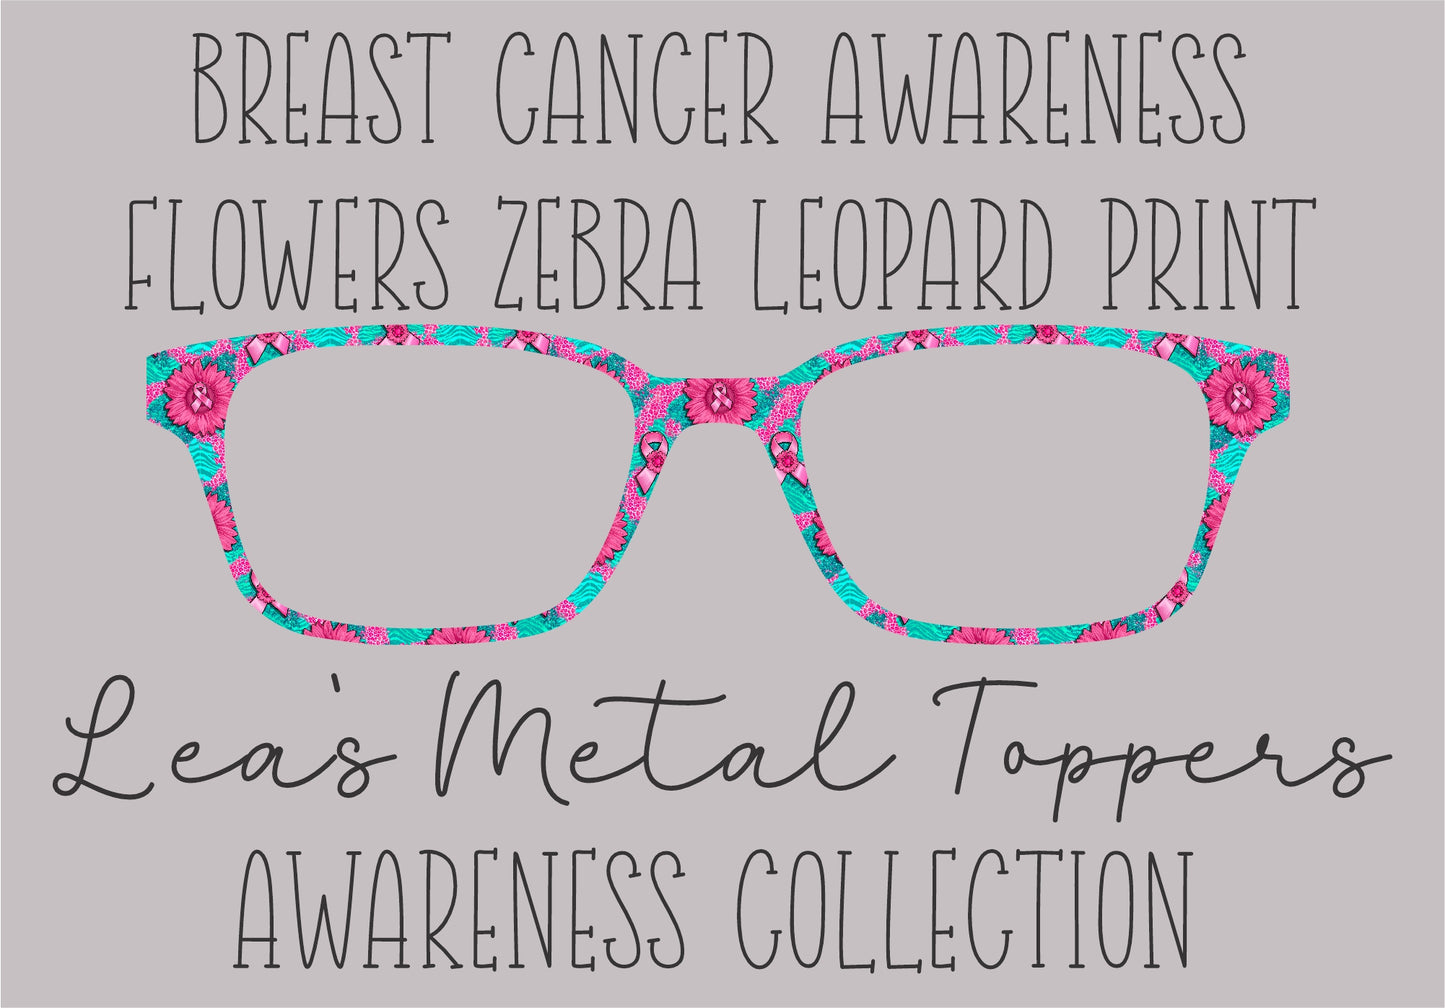 BREAST CANCER AWARNESS FLOWER ZEBRA LEOPARD PRINT Eyewear Frame Toppers COMES WITH MAGNETS